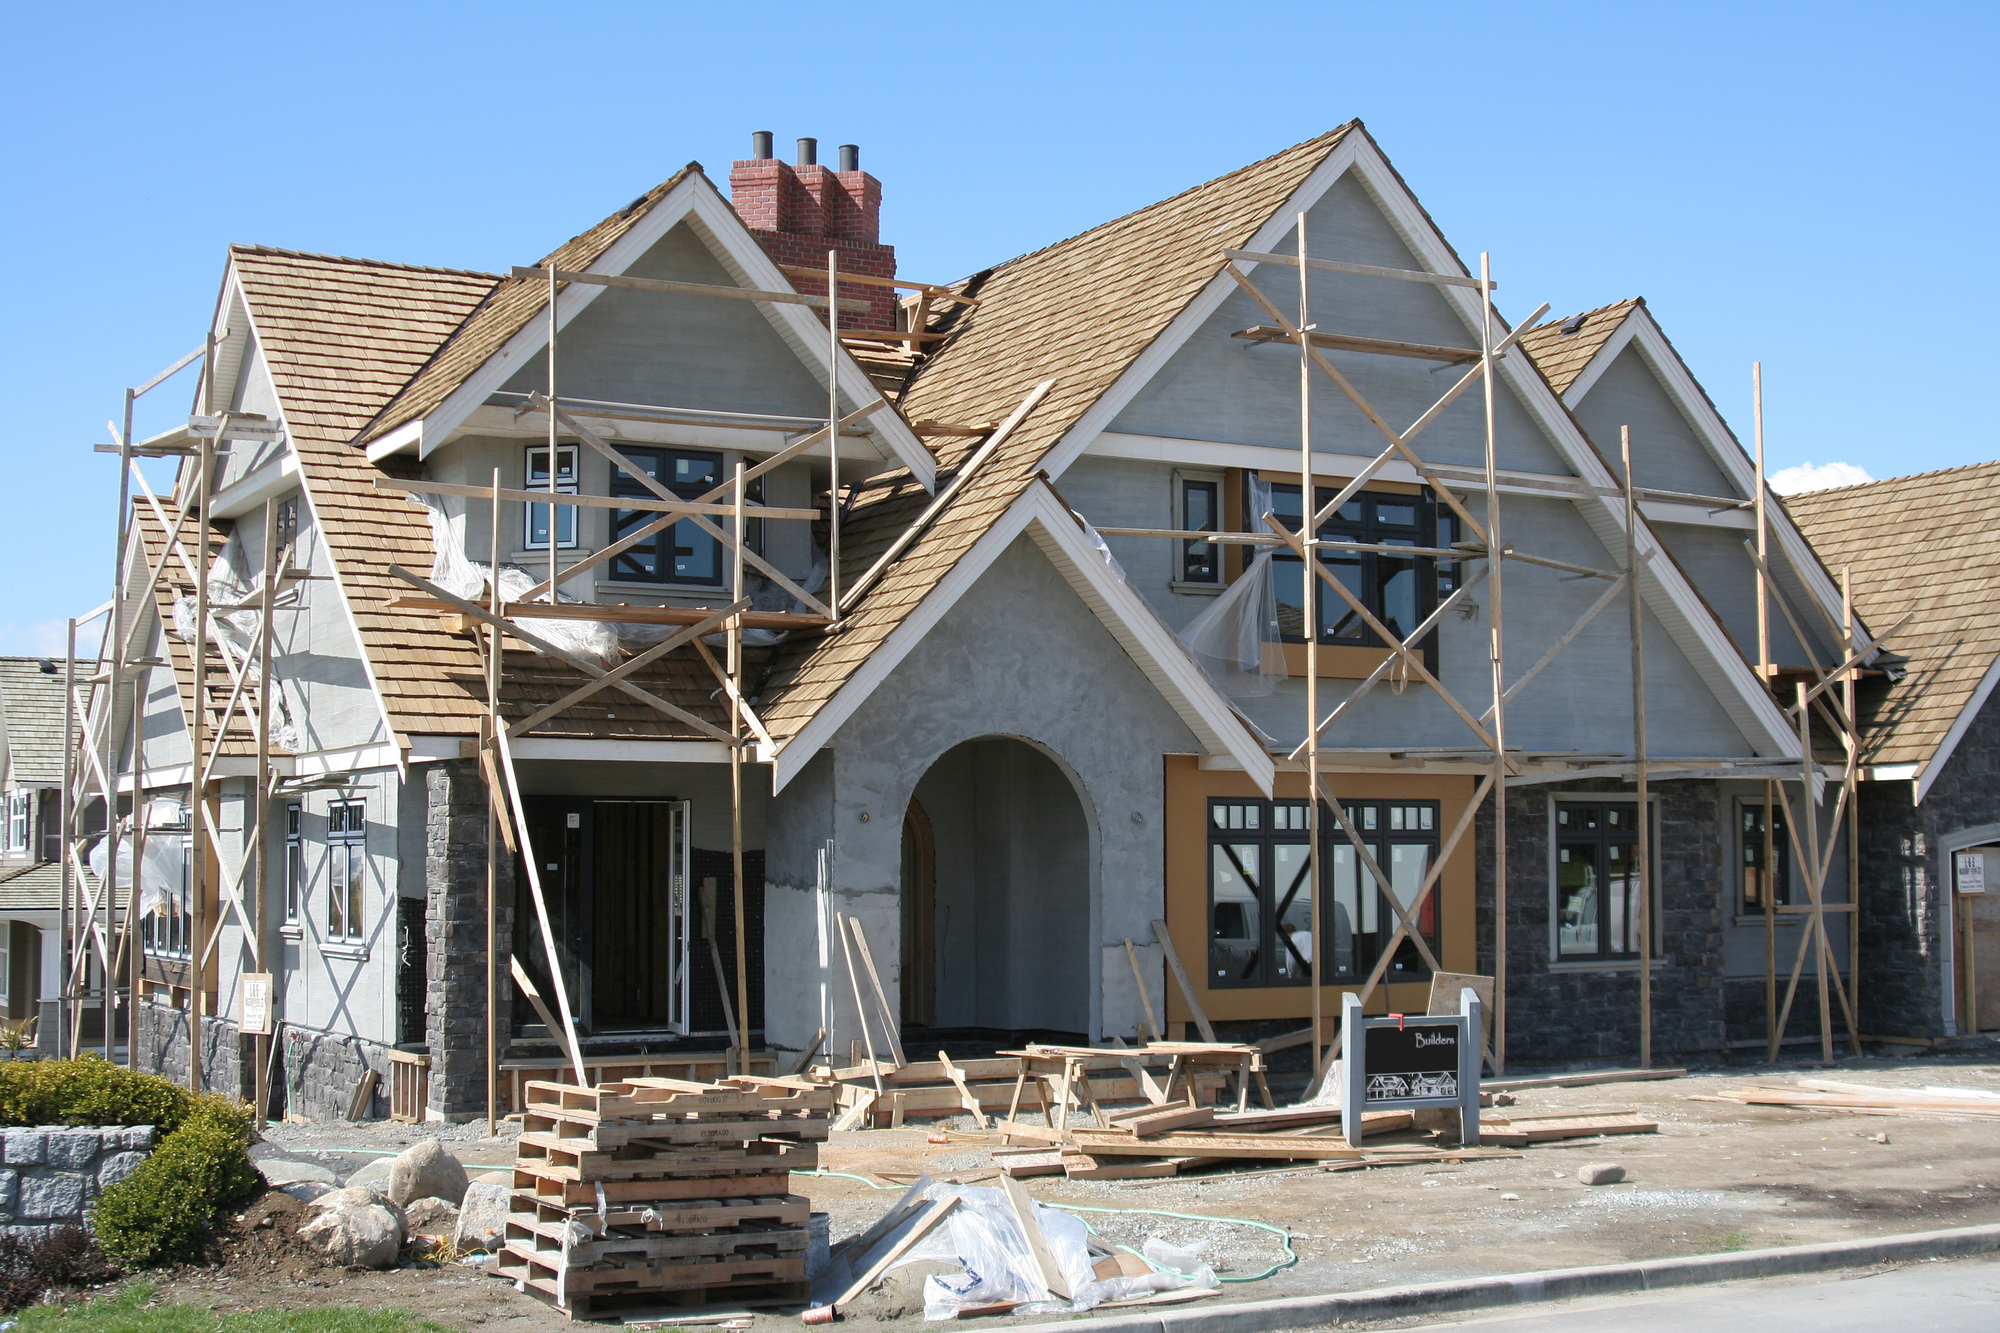 A new single-family home under construction in Calgary, Alberta, Canada with an arched doorway.